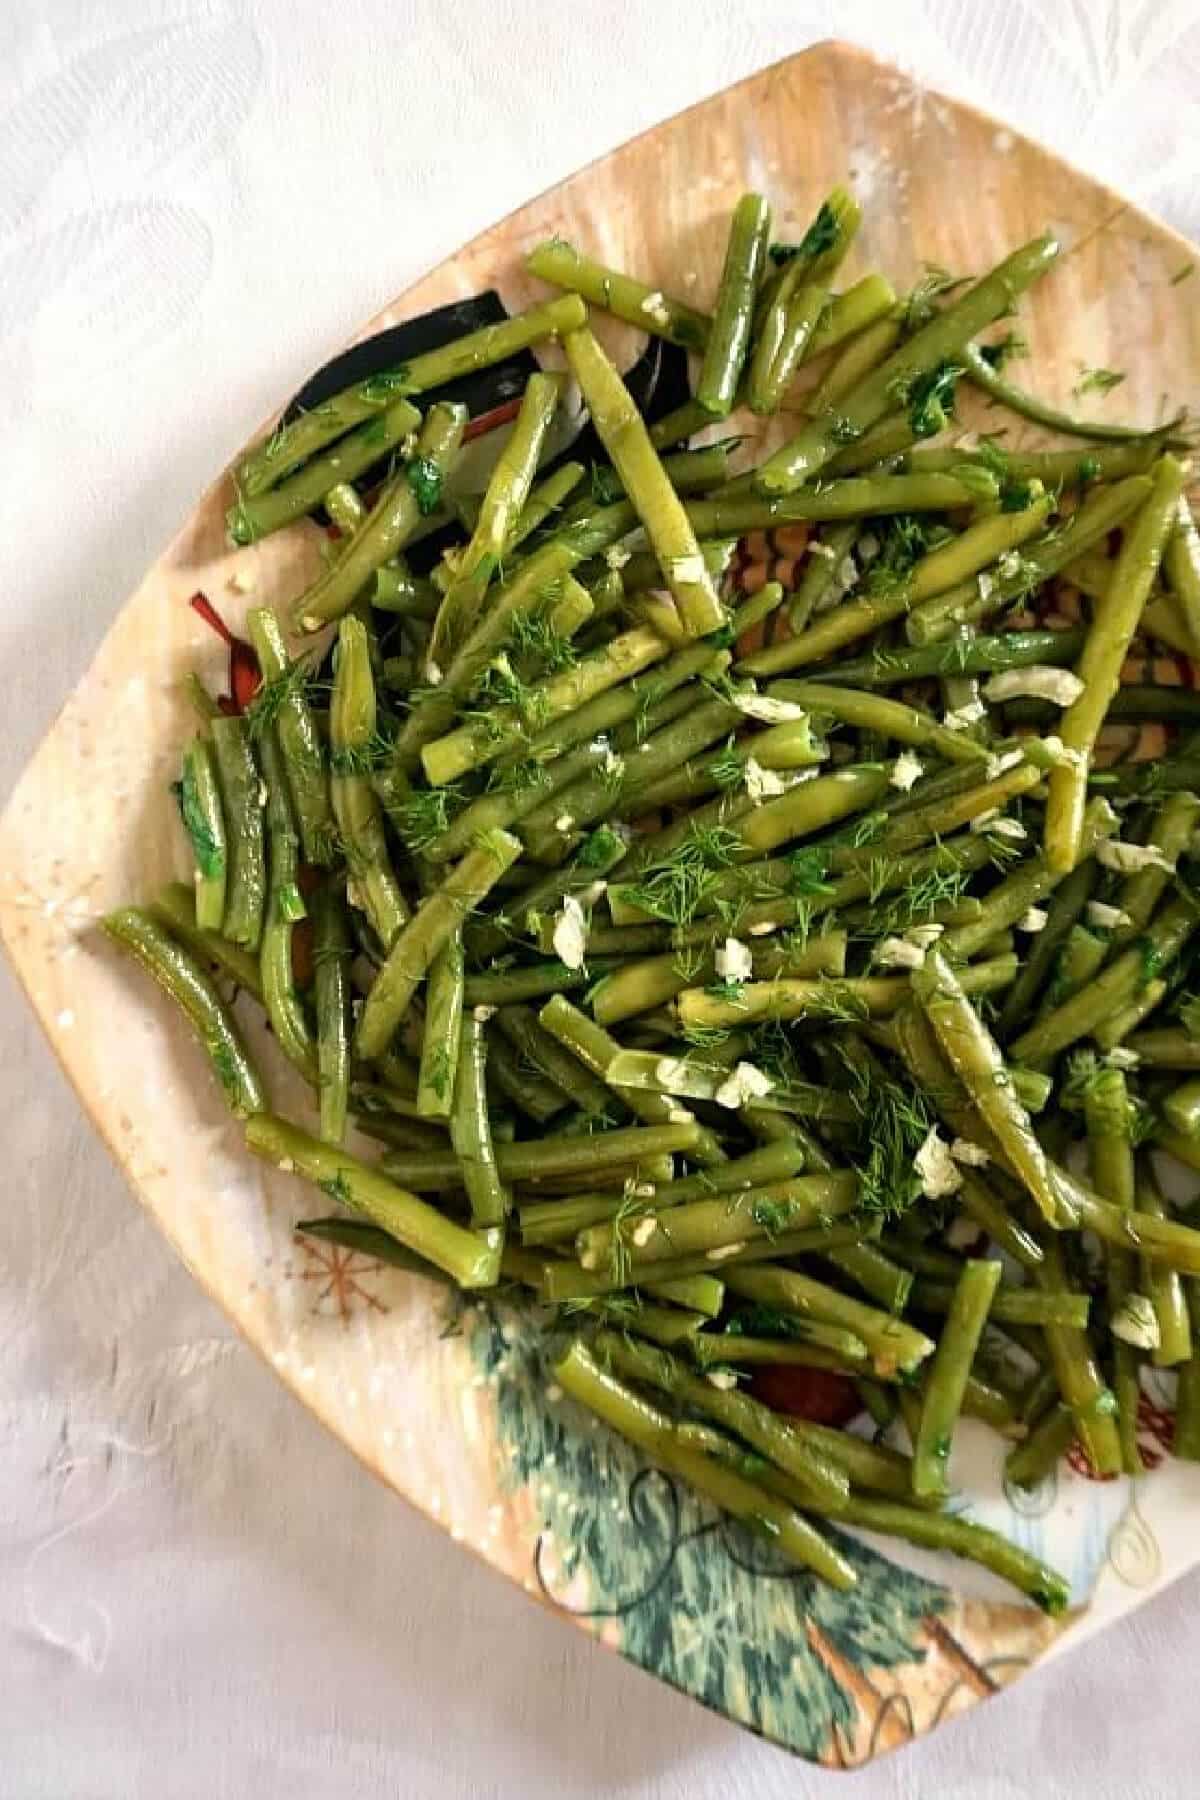 A dish with green beans.